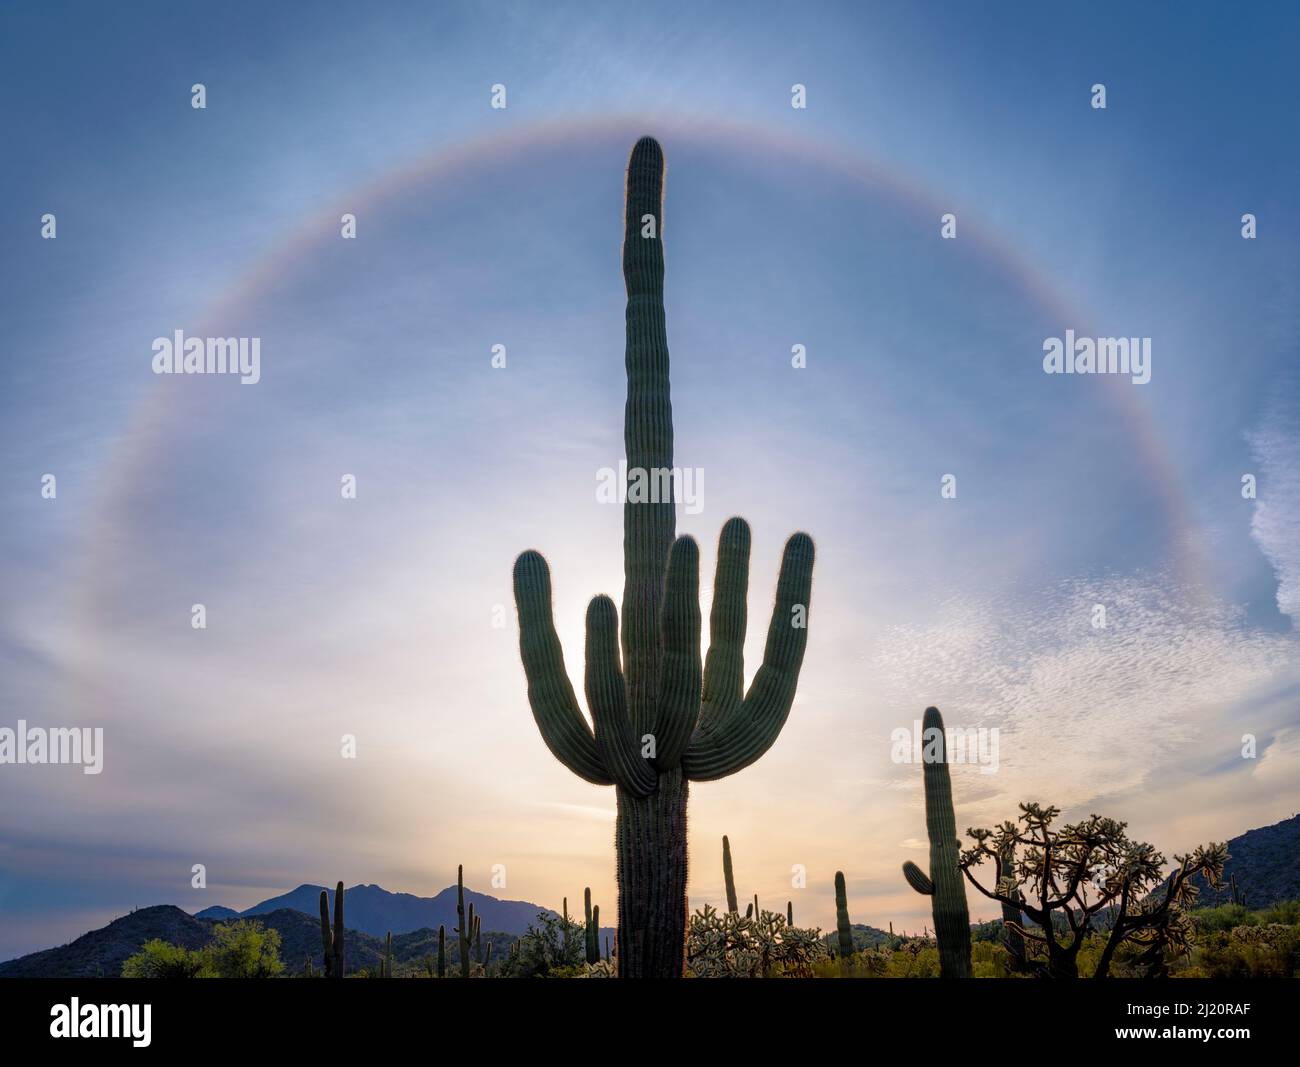 Saguaro (Carnegiea gigantea) cacti silhouetted against morning sun. Optical phenomenon known as glory in sky caused by sun burning off ground fog. Cab Stock Photo